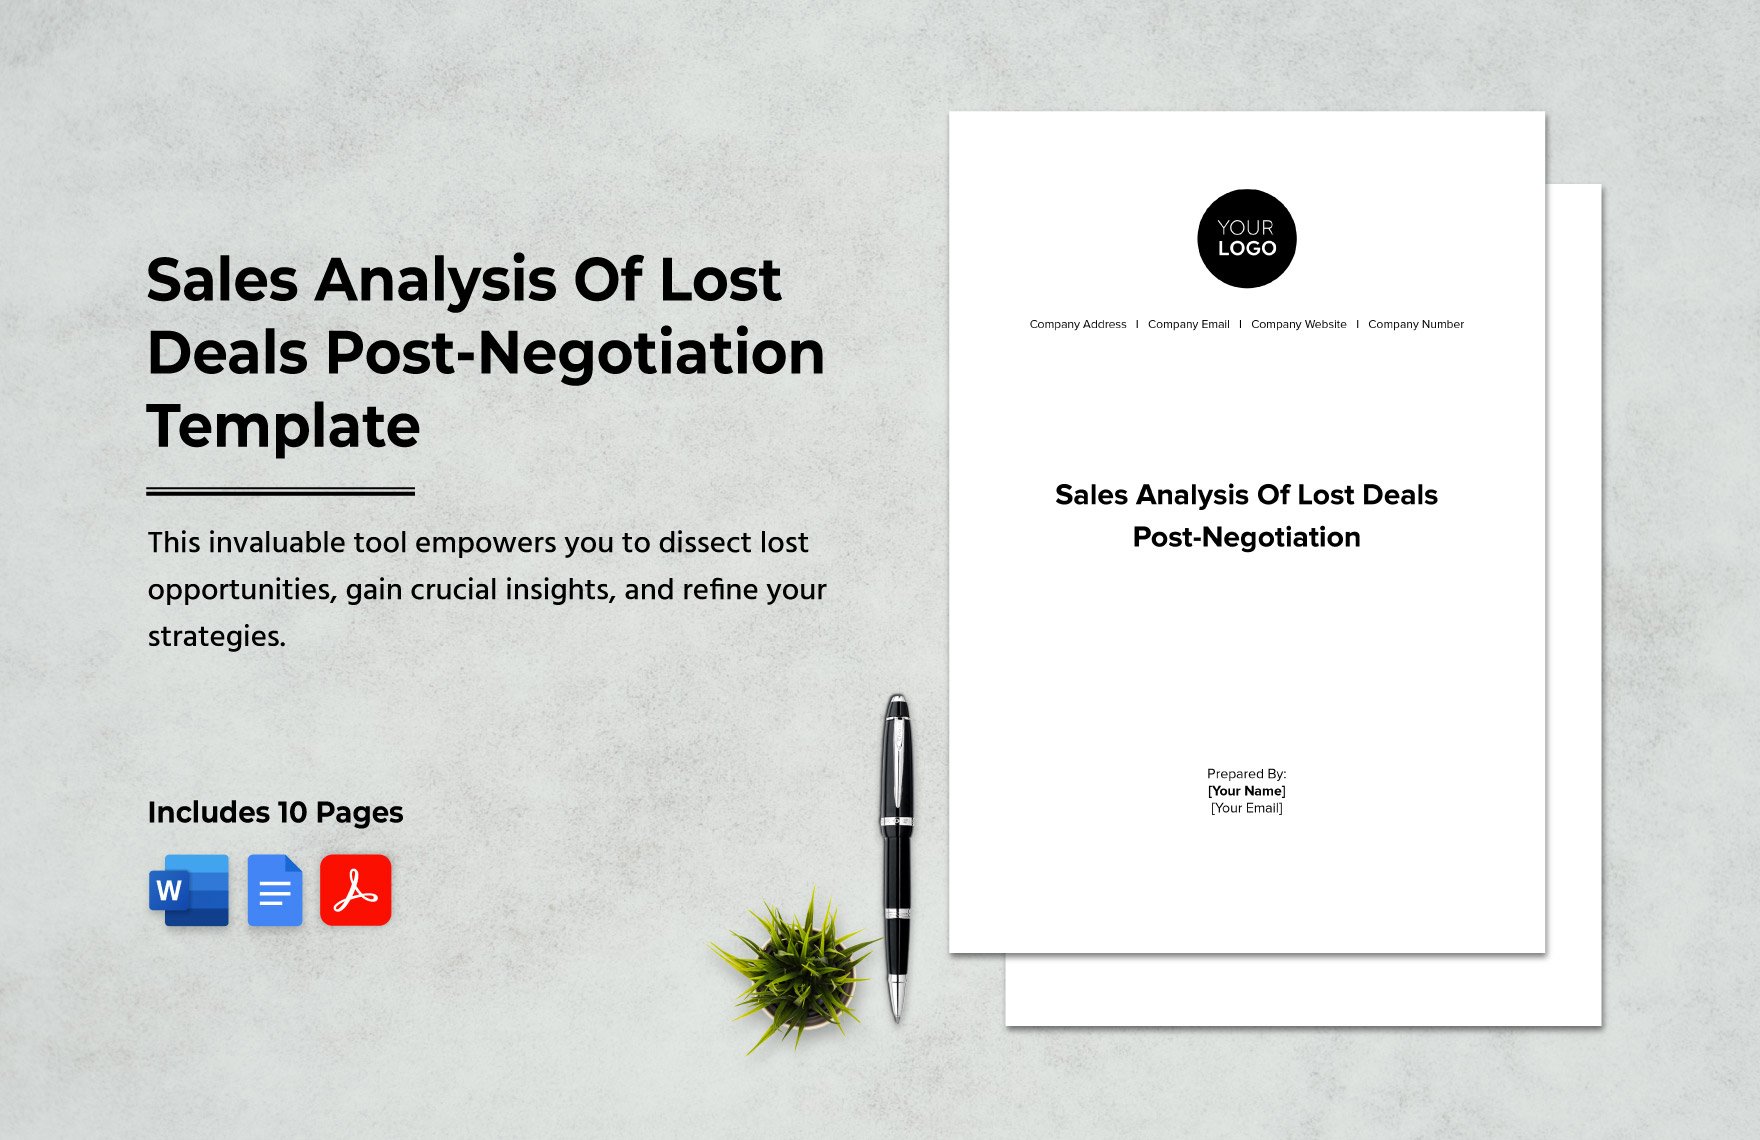 Sales Analysis Of Lost Deals Post-Negotiation Template